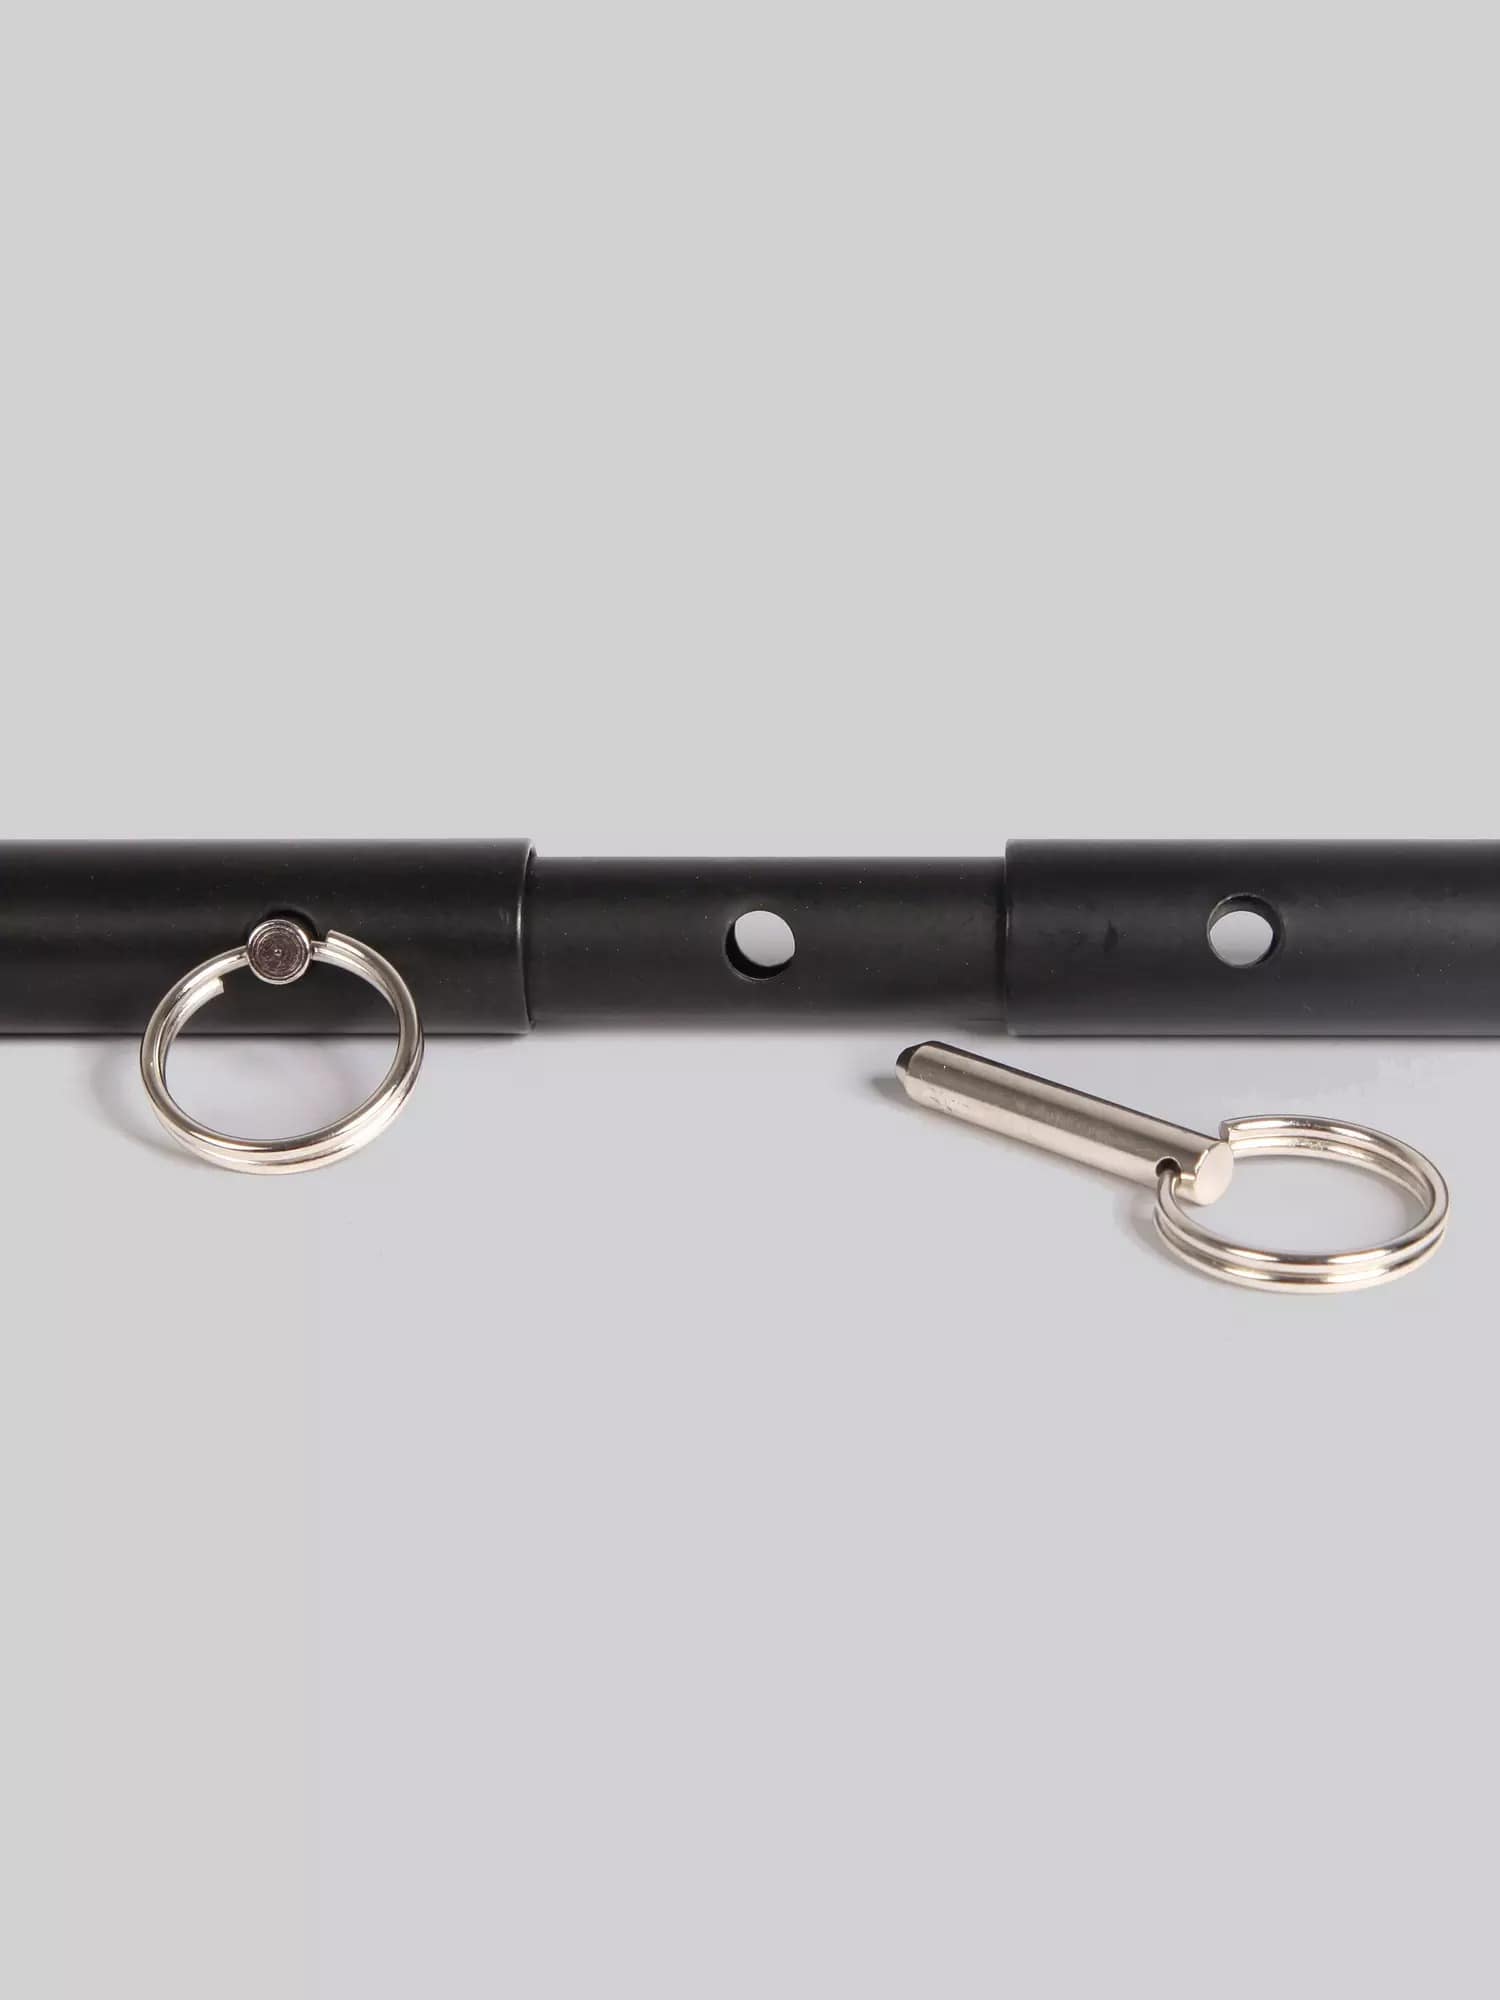 Bondage Boutique Expandable Spreader Bar with Leather Cuffs. Slide 3